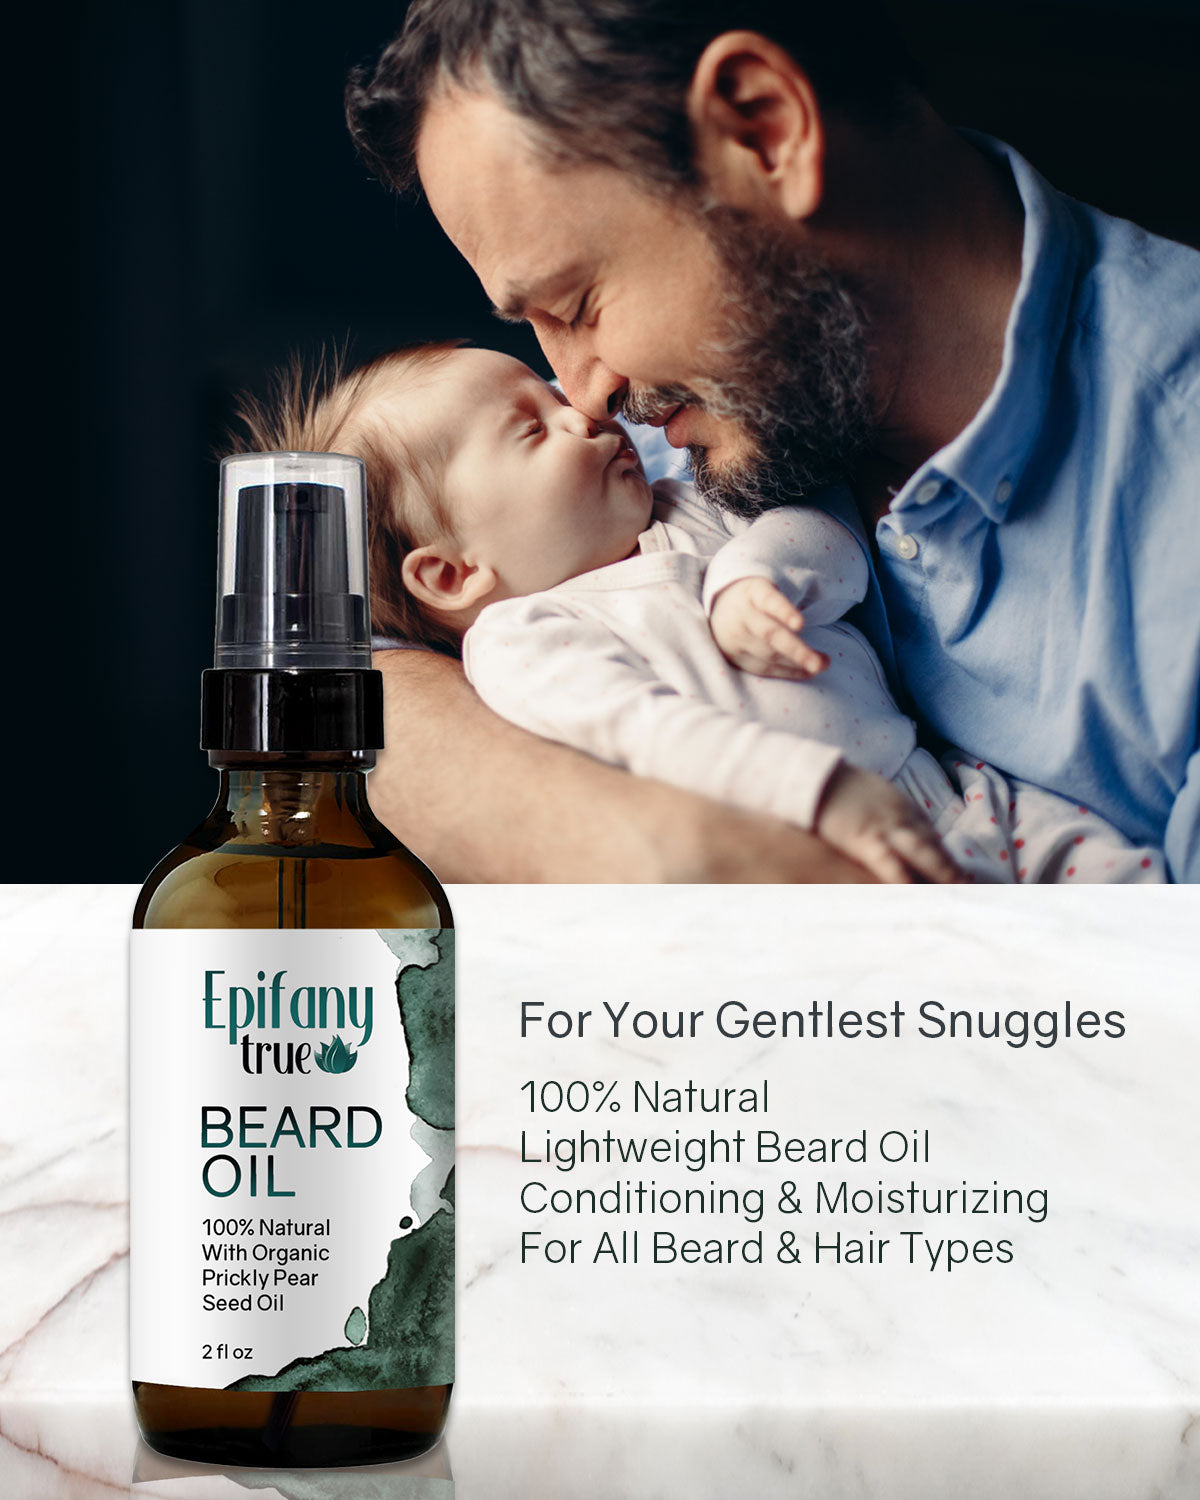 Epifany True 100% Natural Beard Oil 2oz with Prickly Pear Seed Oil is lightweight and lightly scented